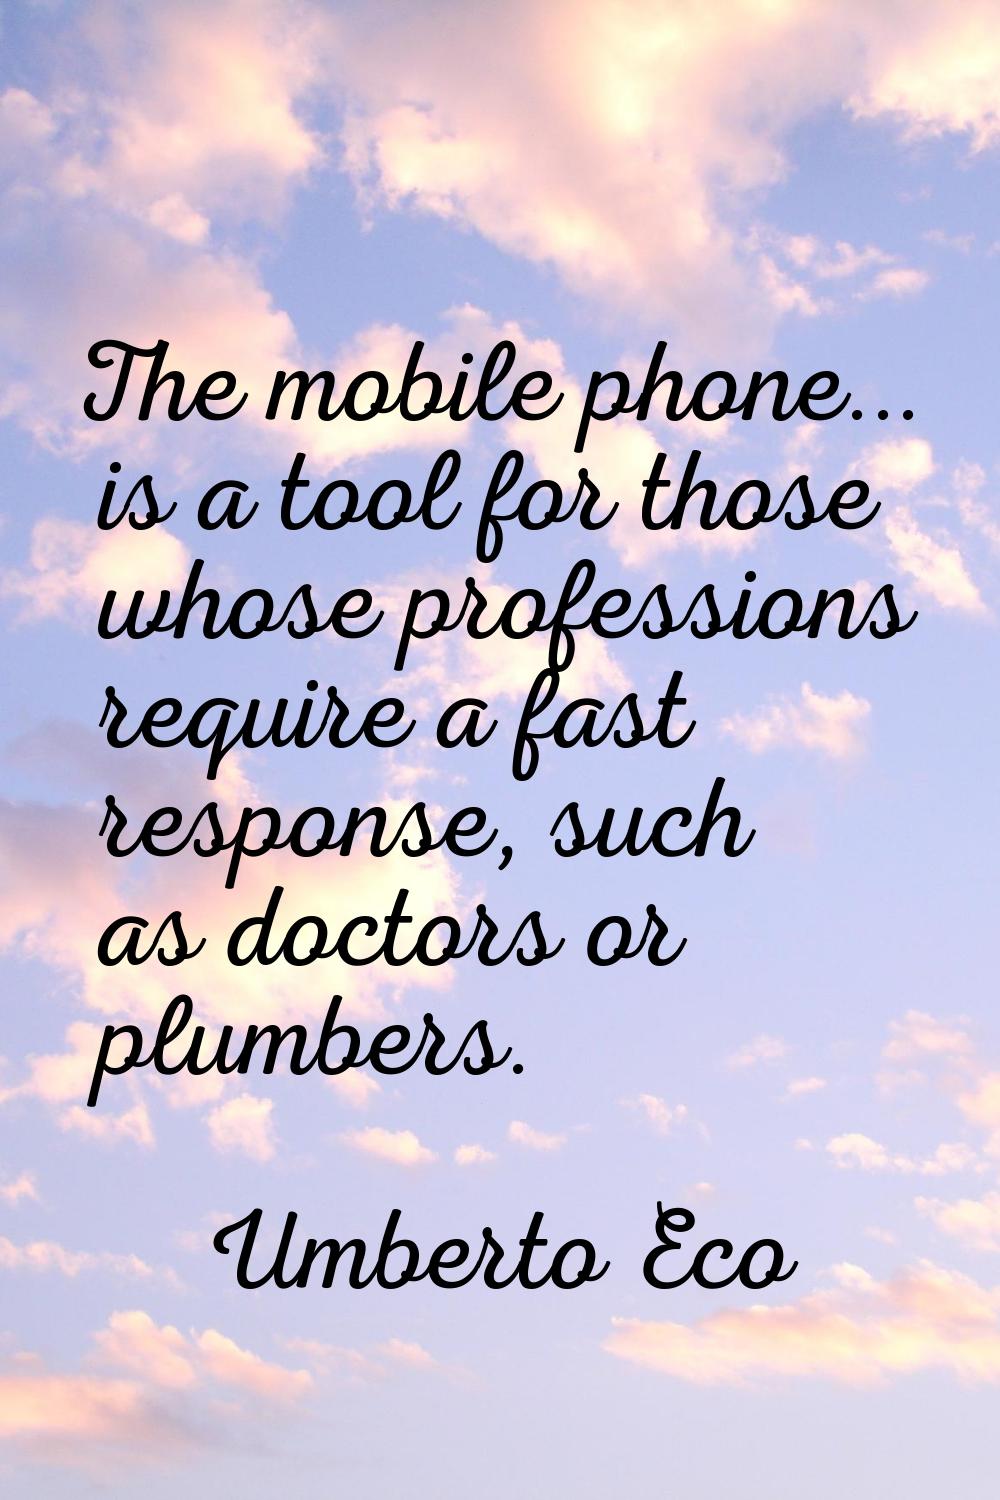 The mobile phone... is a tool for those whose professions require a fast response, such as doctors 